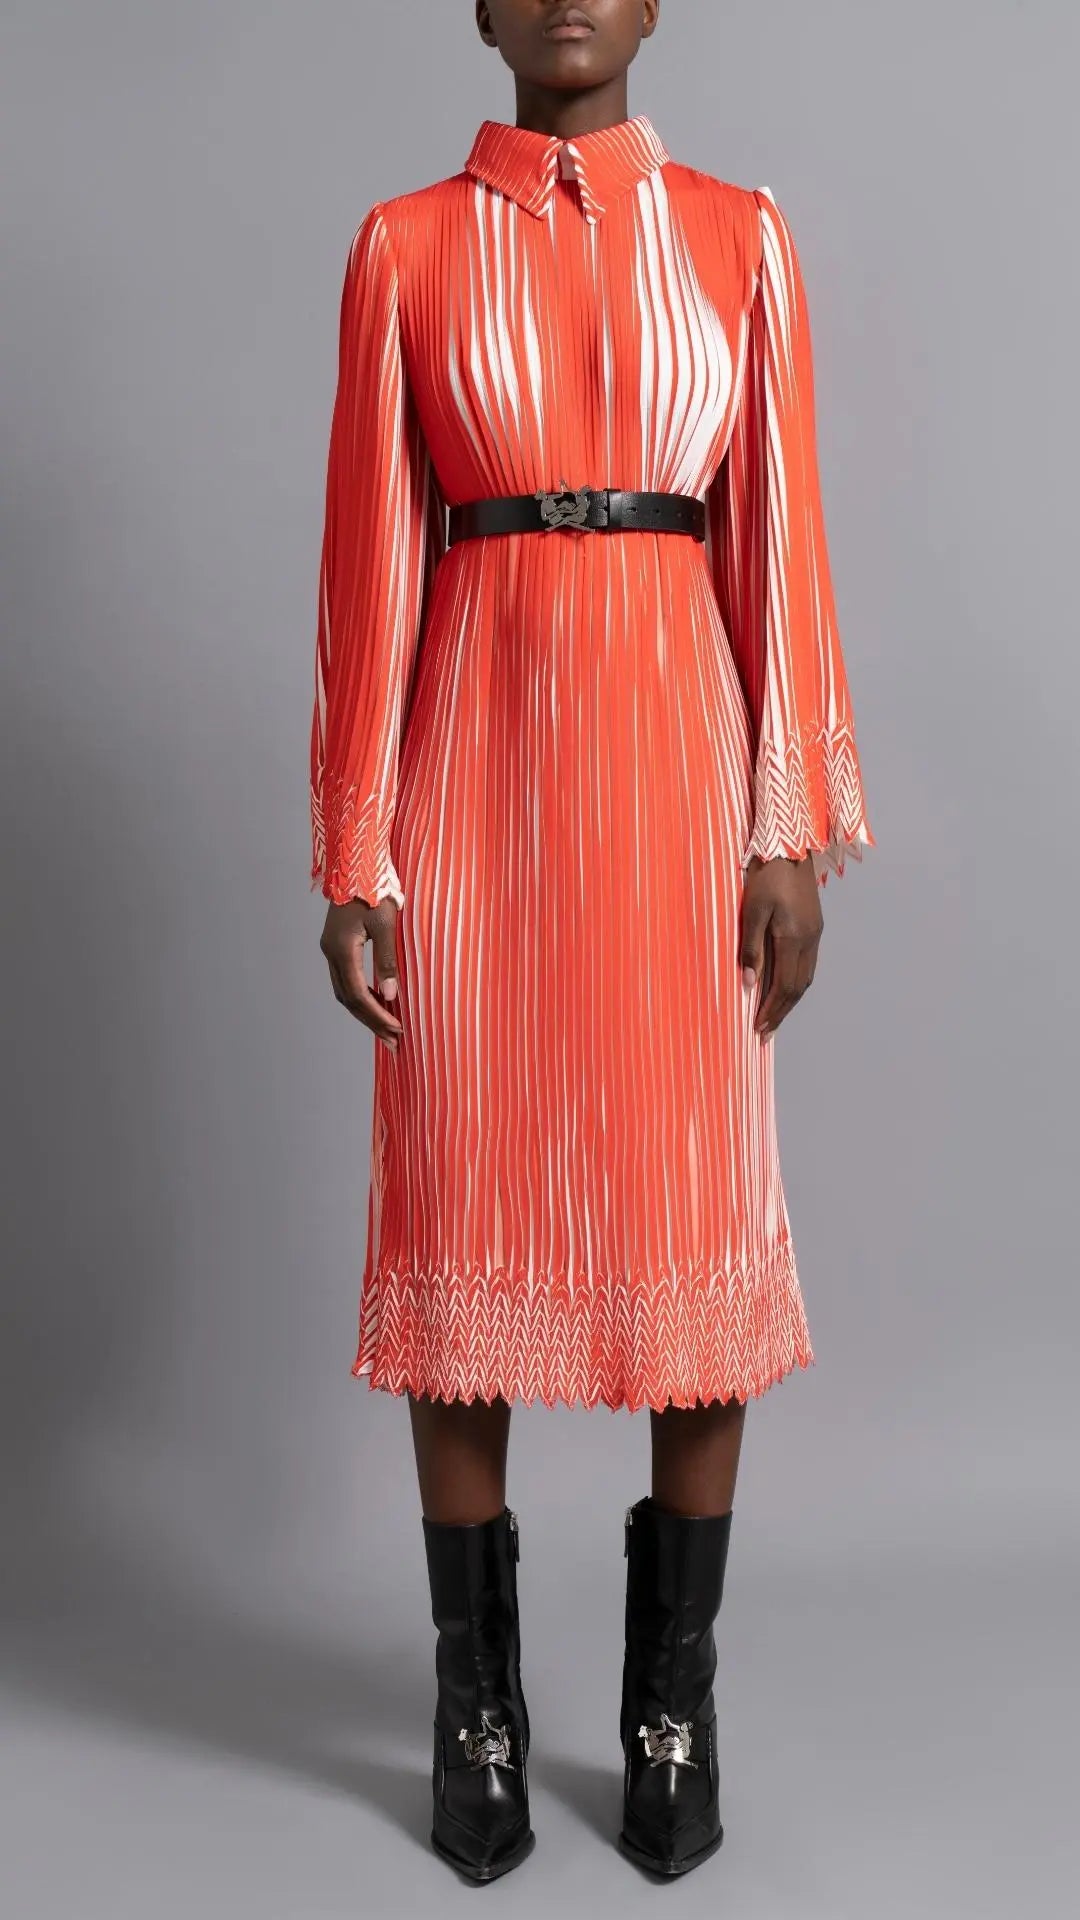 Thebe Magugu Chevron Pleated Dress. Stunning tomato red and white pleated dress with a collar, fitted waist and double chevron hem at the sleeves. It features a hidden zipper in the back. Shown on model facing forward.